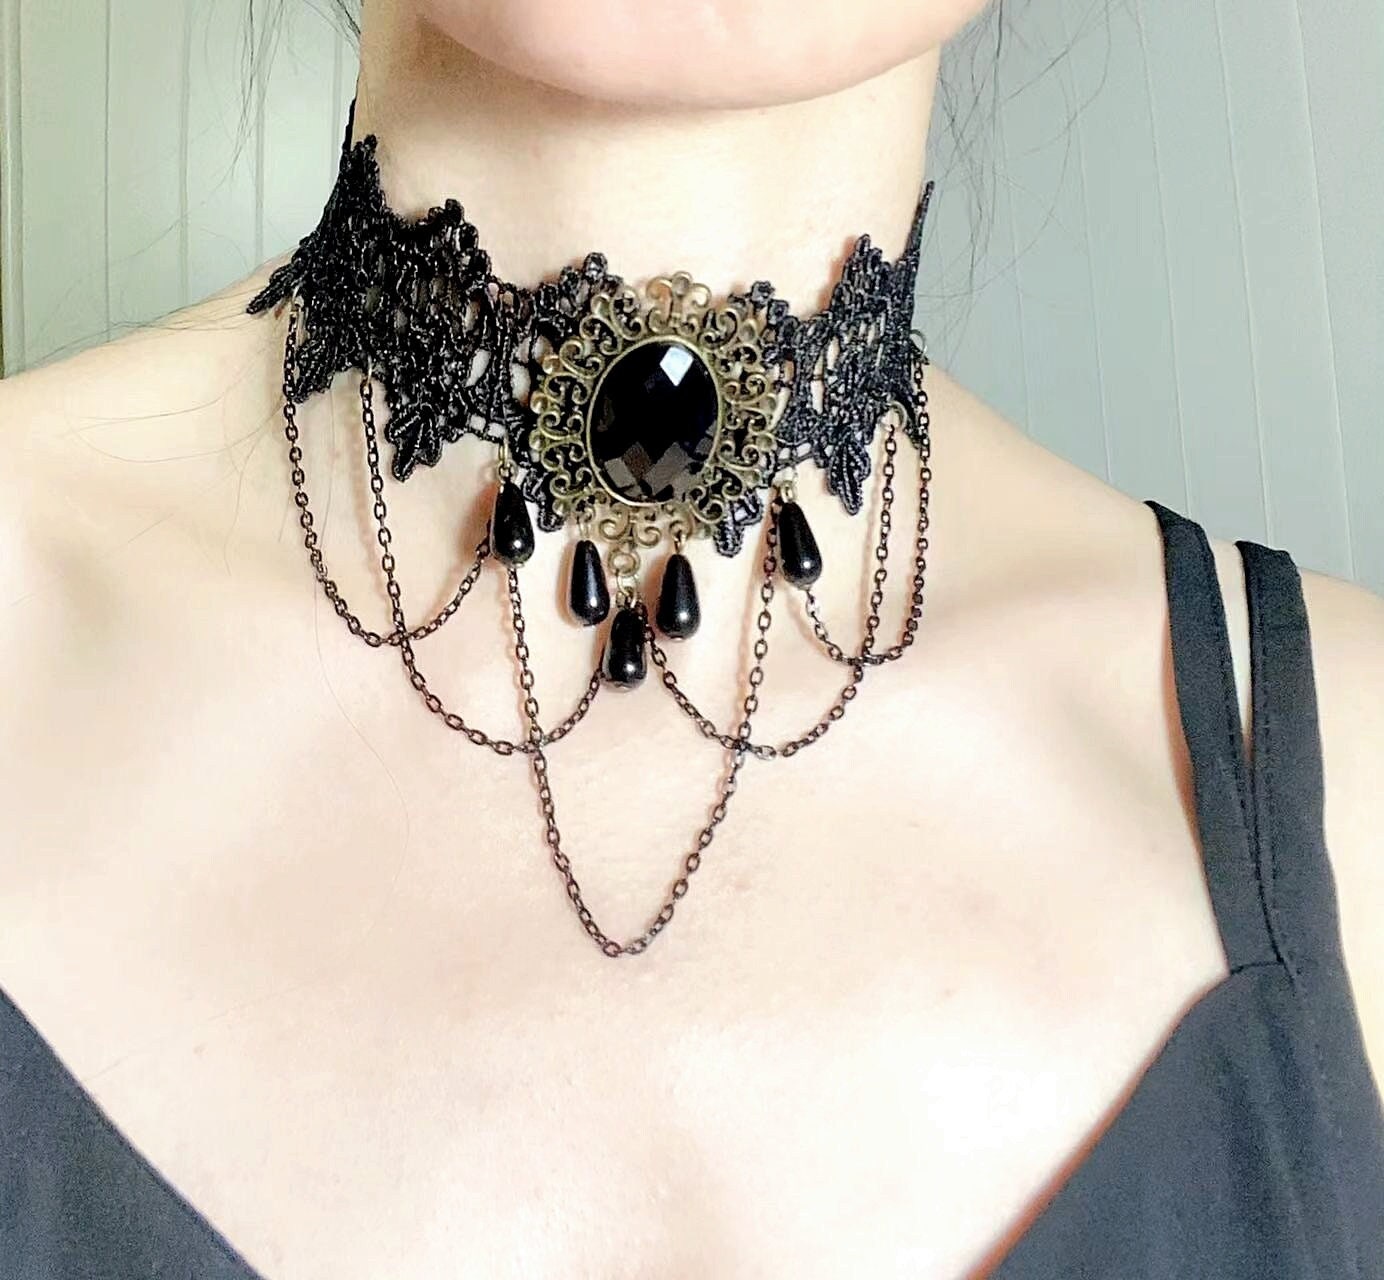 Black Elegant Fabric Handmade Lace Choker Necklaces/Bracelets Jewelry Set  Neckband for Women, Neck Chain Collar Statement with pendant-6Pack/4Pack